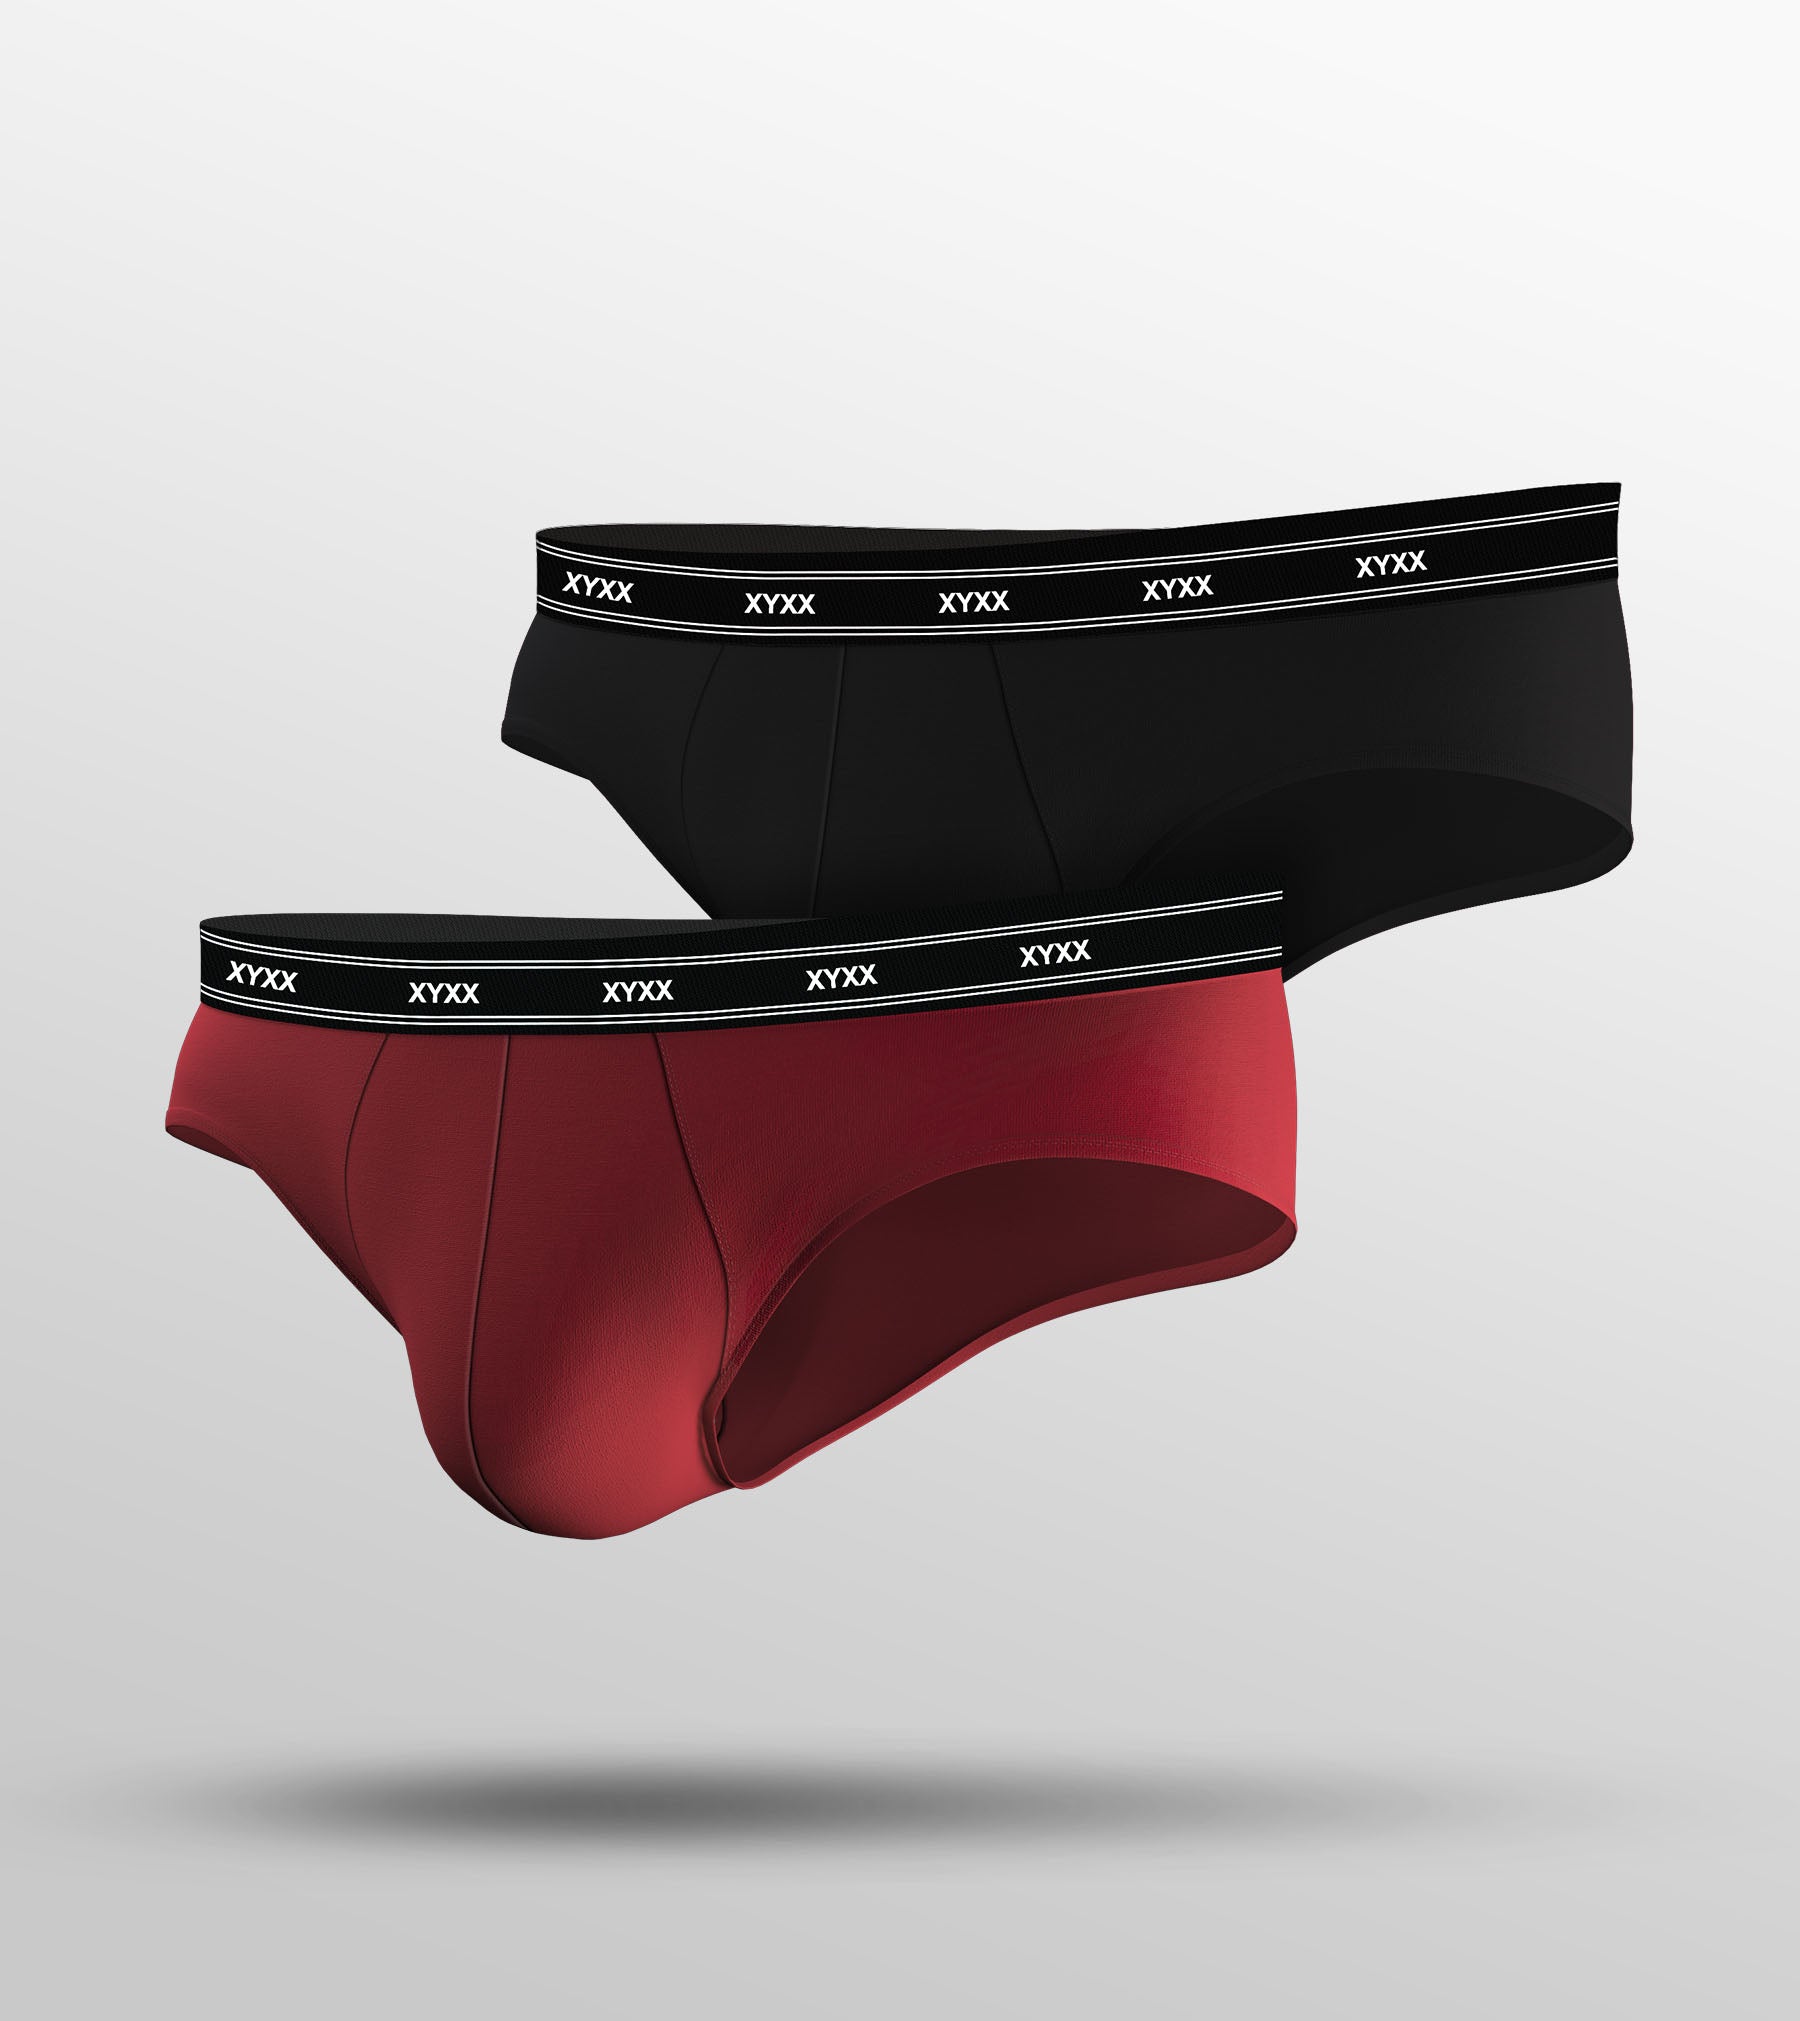 Apollo Bamboo Cotton Briefs For Men Pack of 2 (Red, Black) -  XYXX Mens Apparels